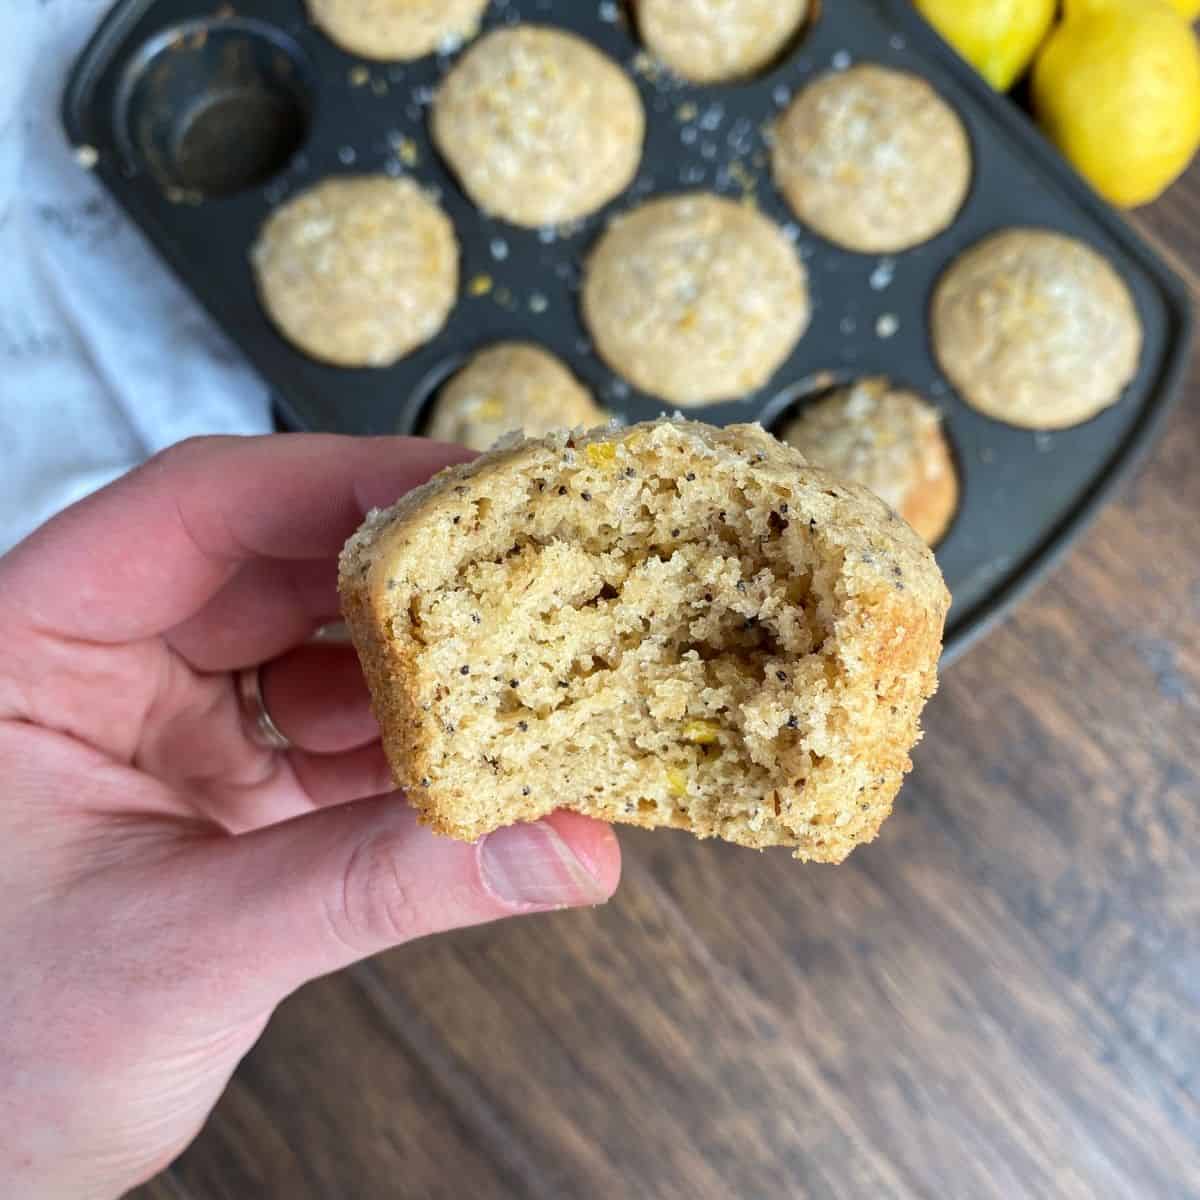 Lemon poppy seed muffin with a bite taken out of it. Pan of muffins in the background